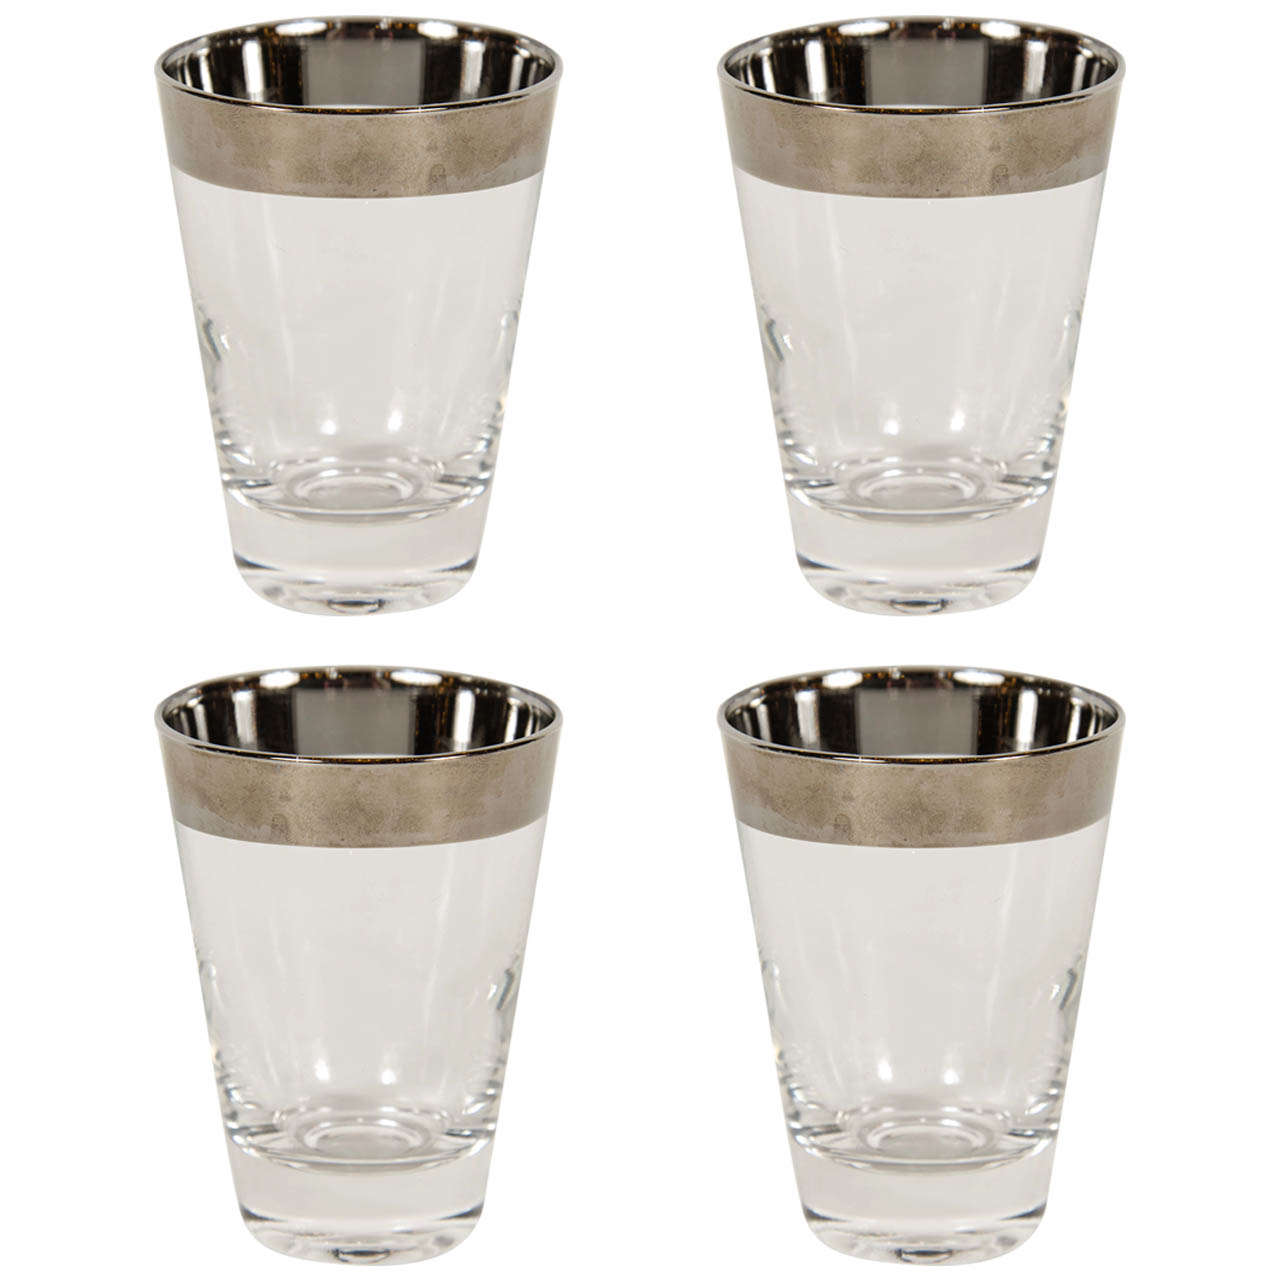 Art Deco Set of Four Tumblers by Dorothy Thorpe